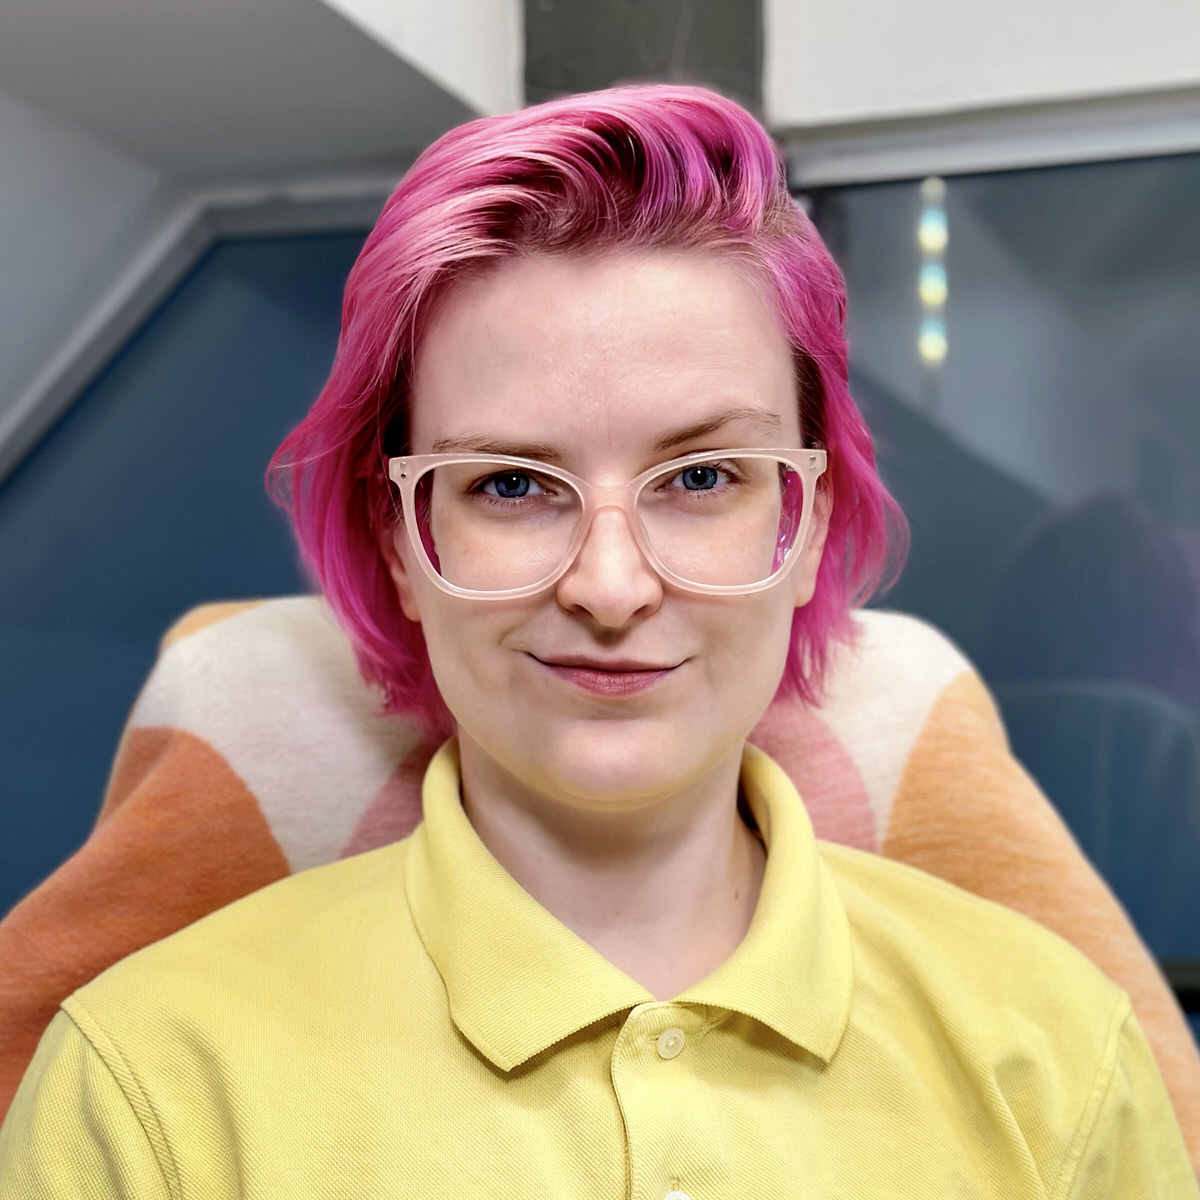 A portrait of Alja Isaković looking directly at the camera with a half smile. Alja has short pink hair, and is wearing light pink glasses and a yellow polo shirt.